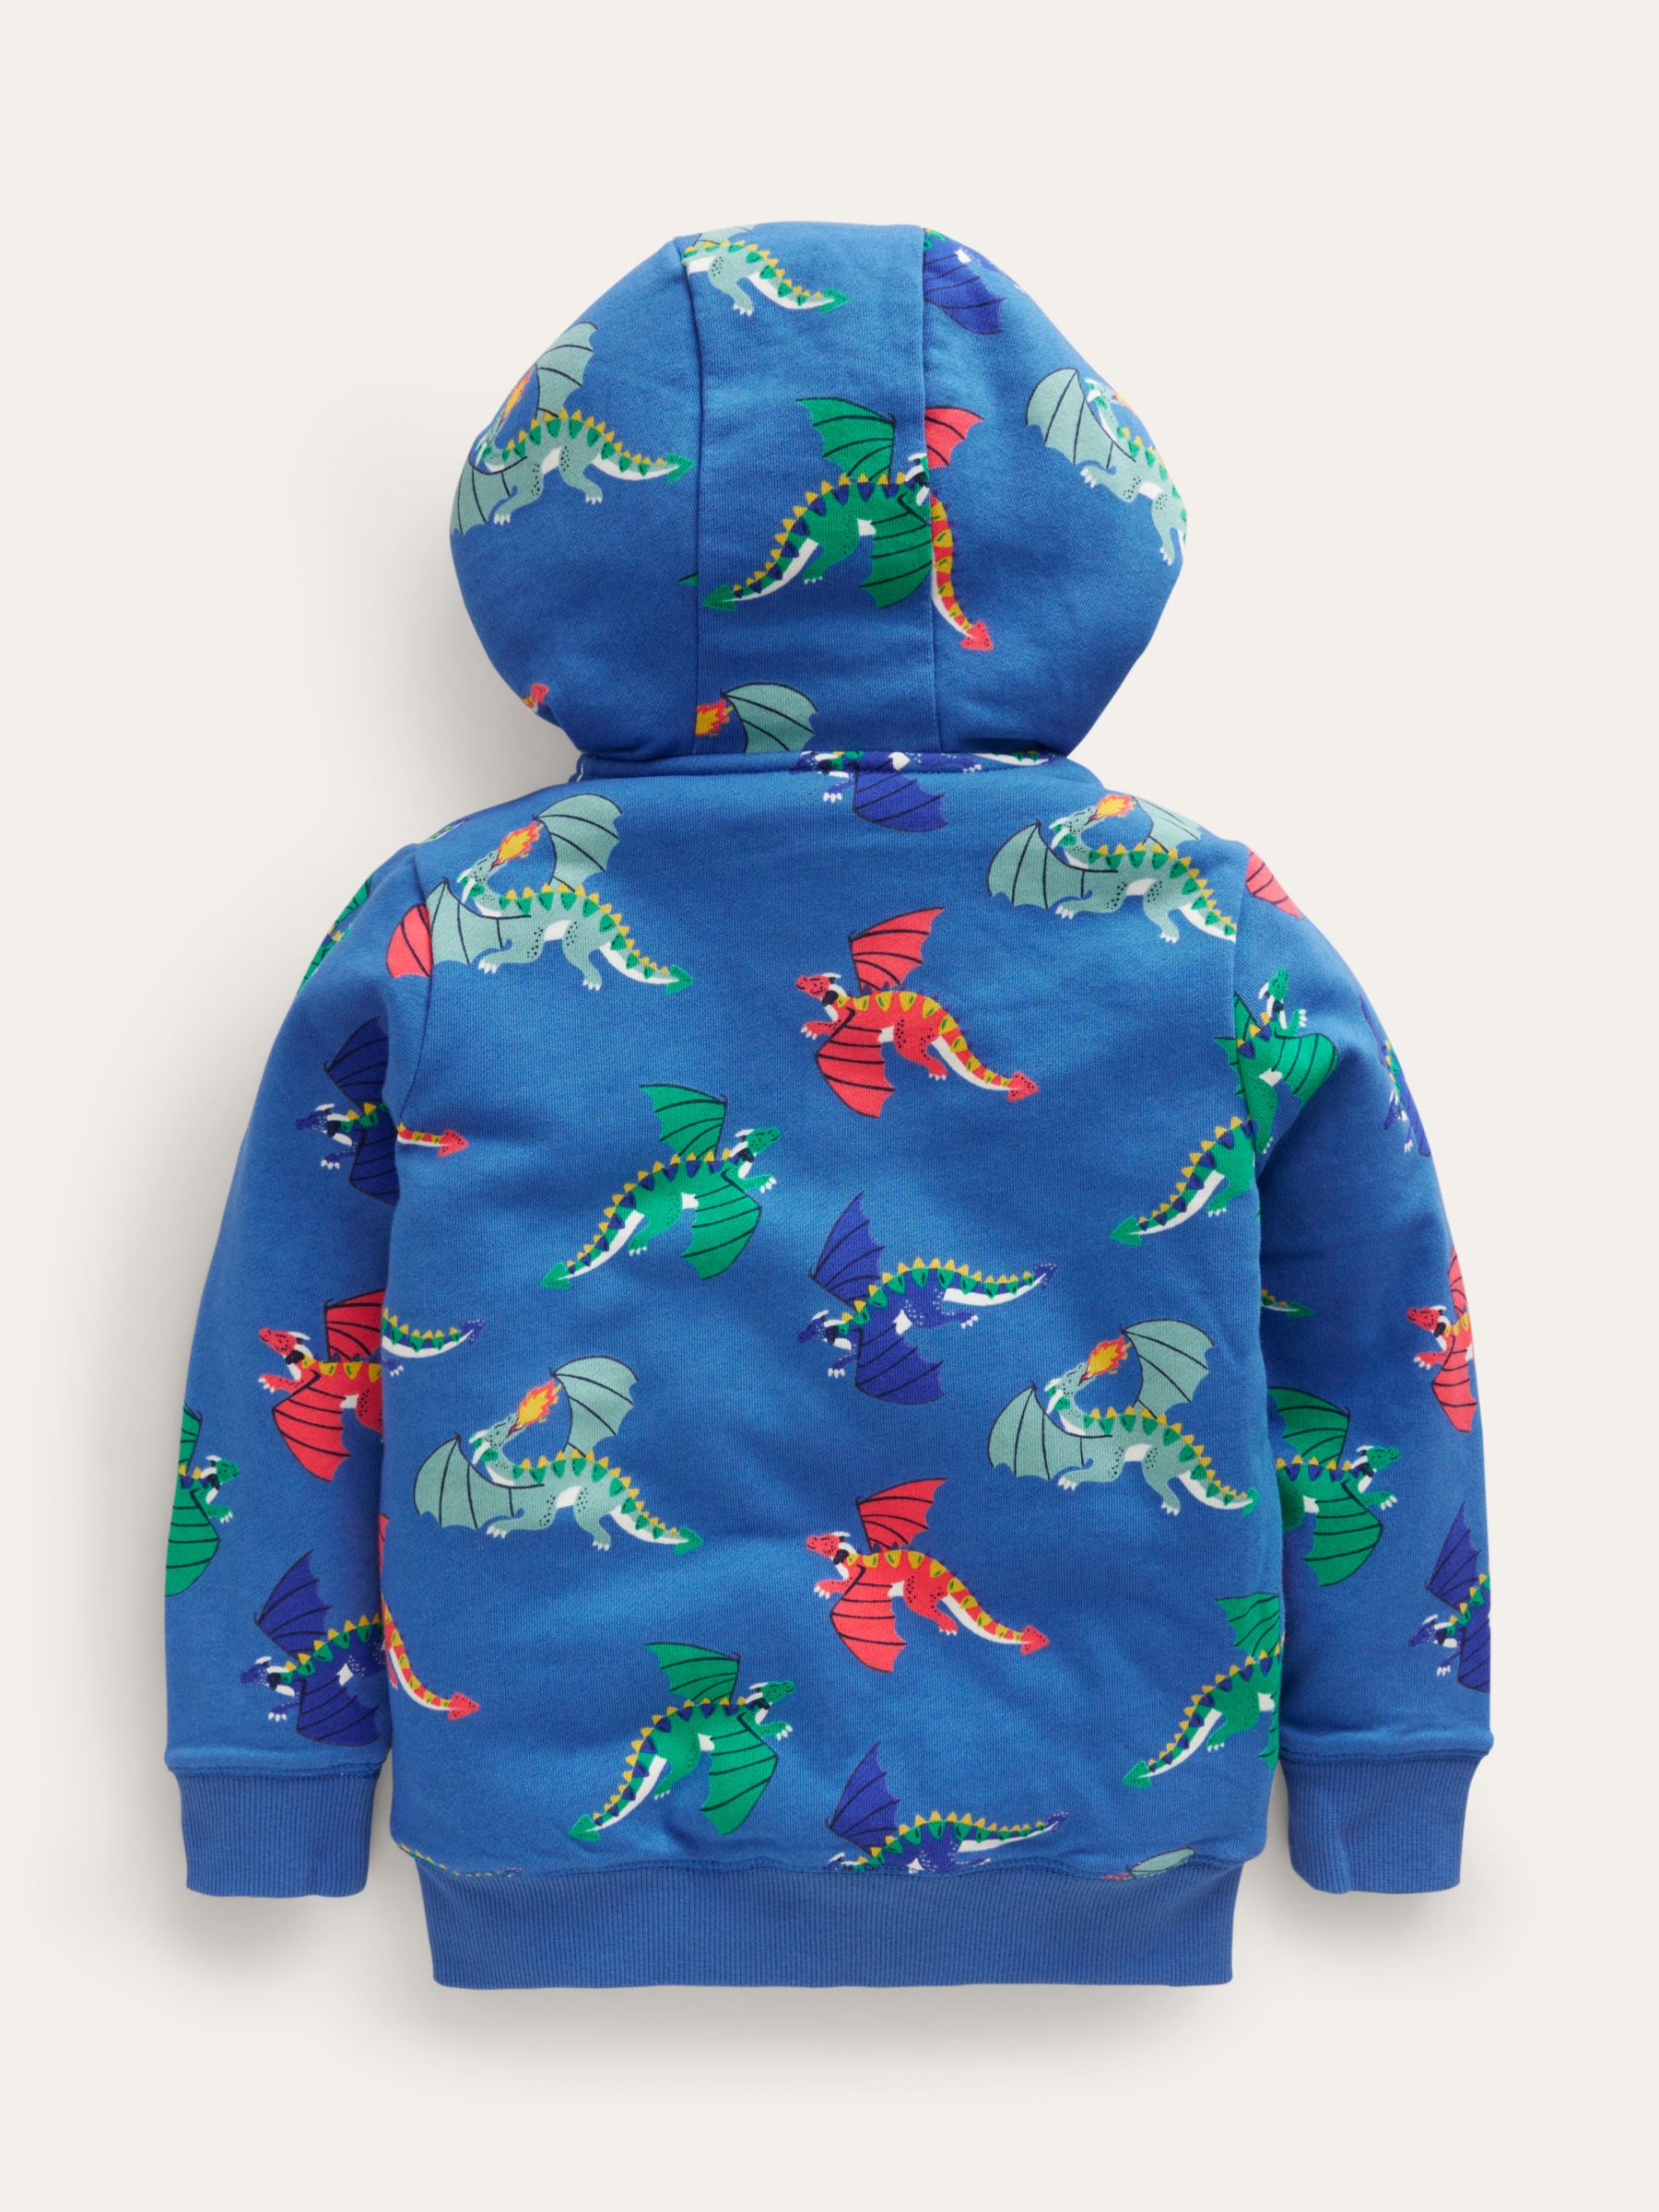 Buy Mini Boden Kids' Shaggy Lined Dragon Print Hoodie, Bluejay Online at johnlewis.com